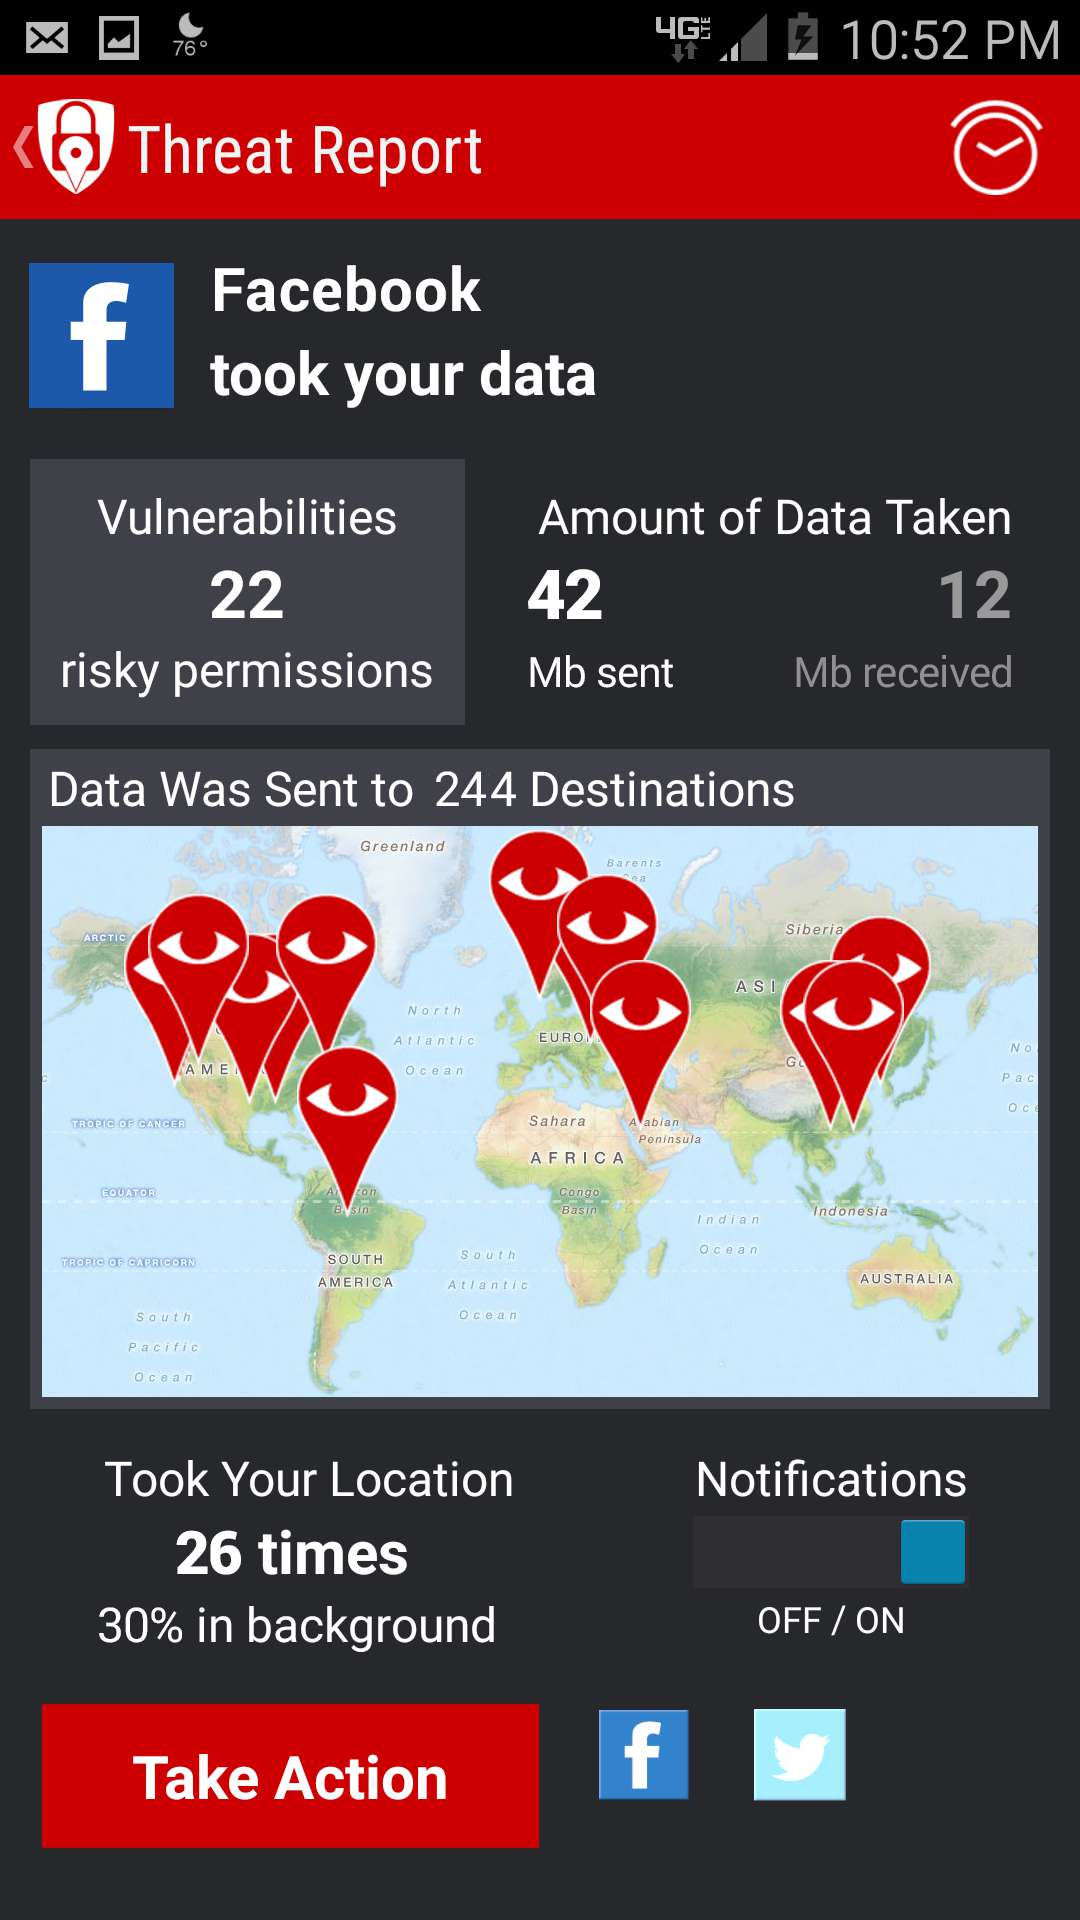 Find out which apps are transmitting your data, how much data they are taking, and where the data is being sent.